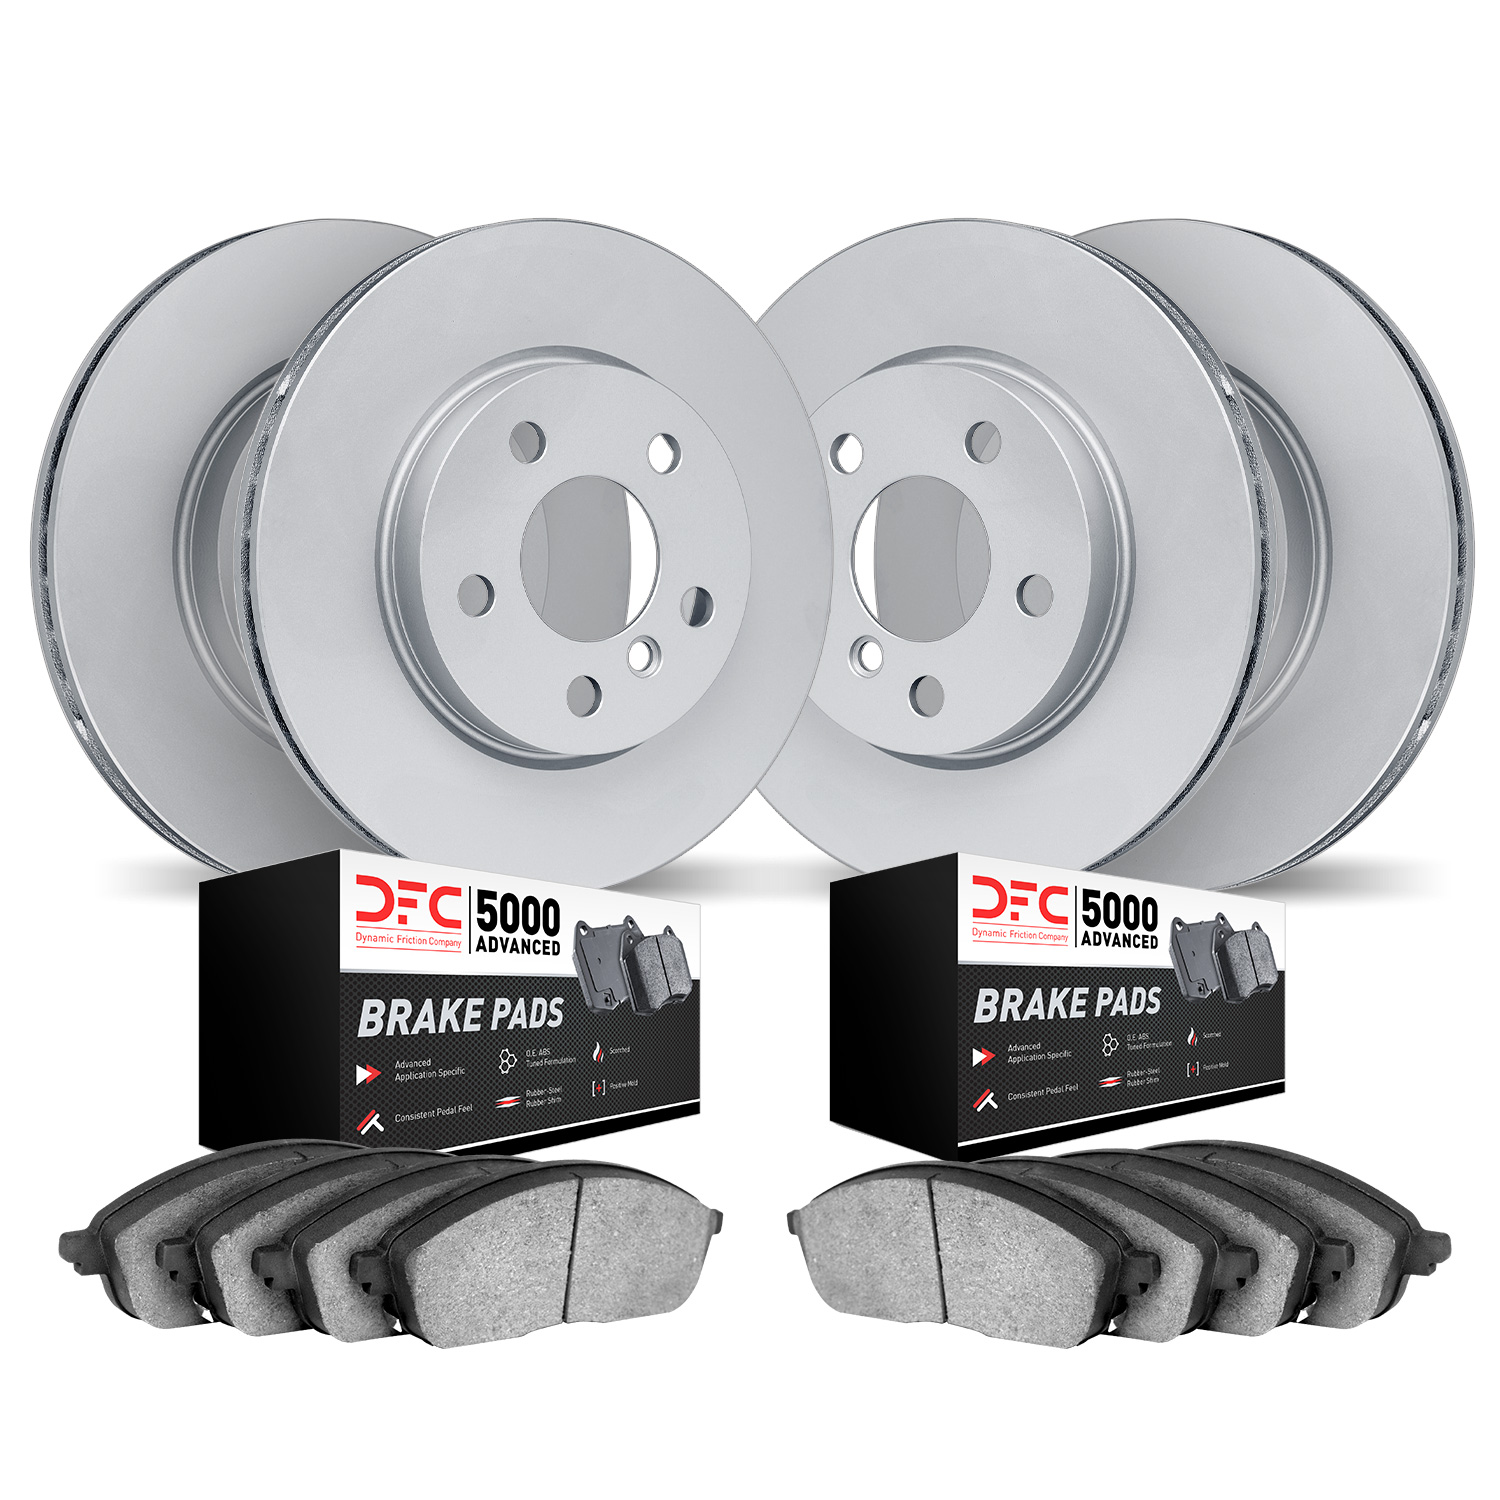 9504-31191 GEOMET Brake Rotors w/5000 Advanced Brake Pads Kit, Fits Select Multiple Makes/Models, Position: Front and Rear